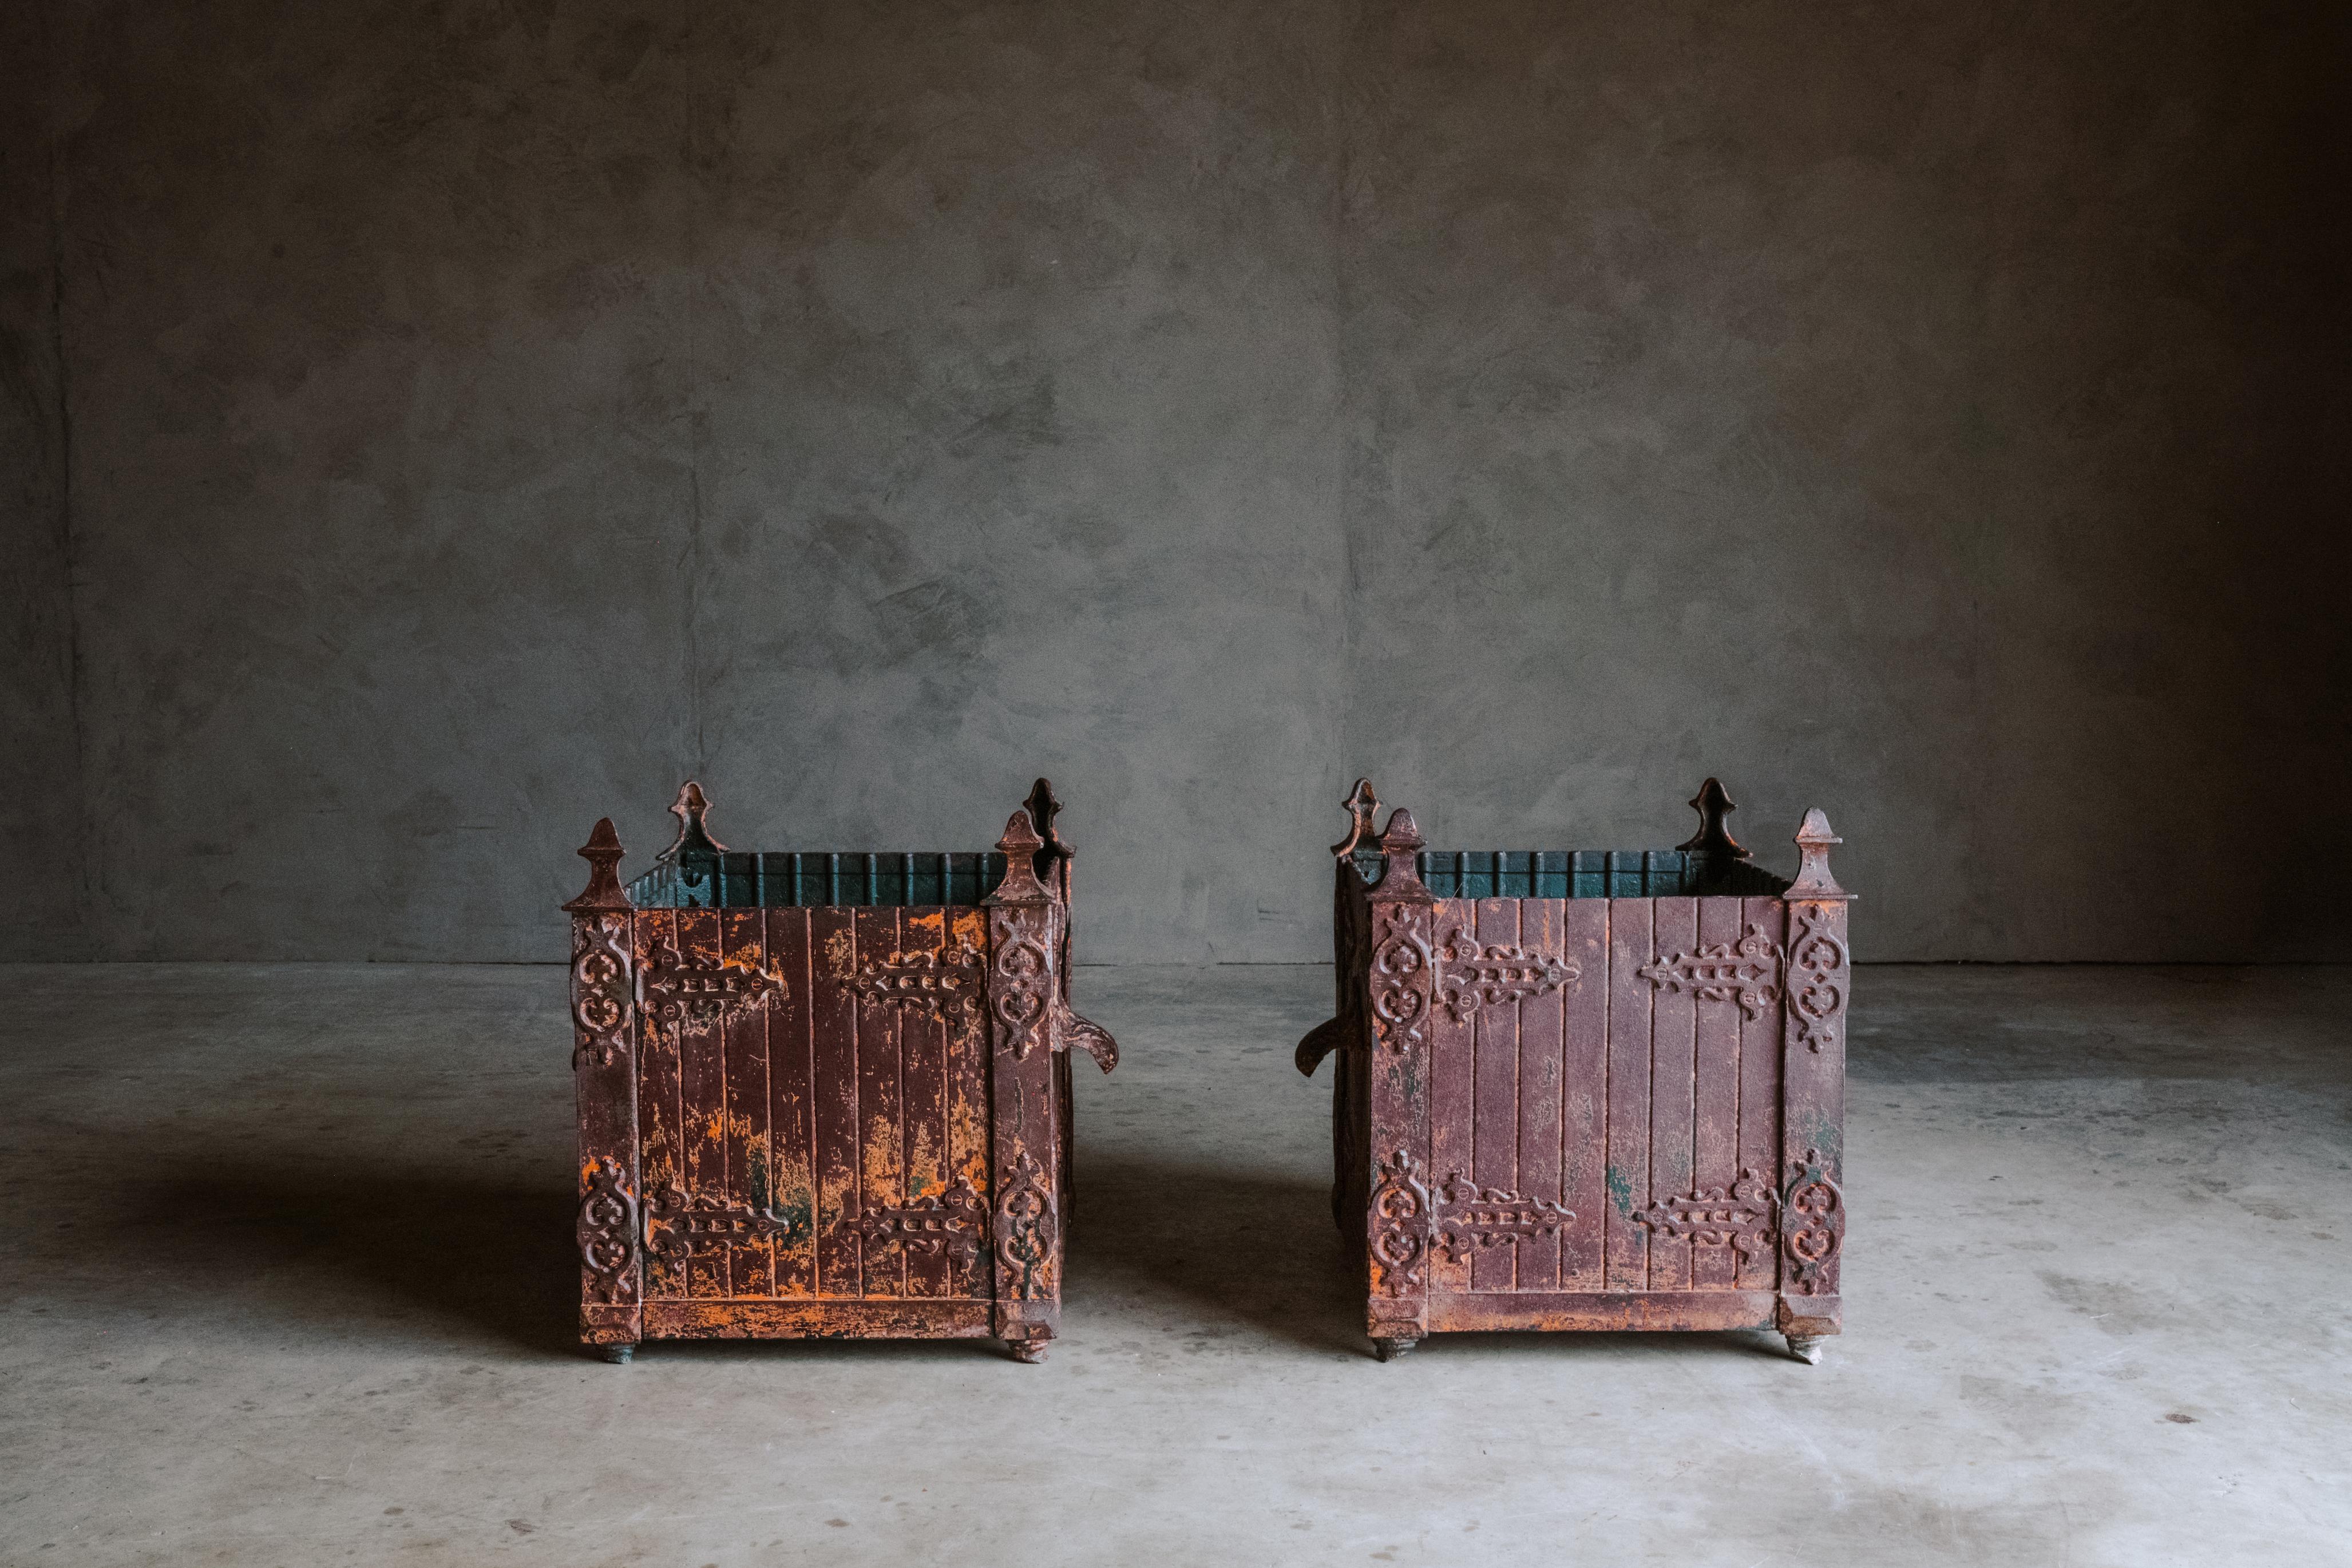 Superb pair of cast iron orangery planters from France, Circa 1880. Solid Iron assembly with handles and fantastic original patina.